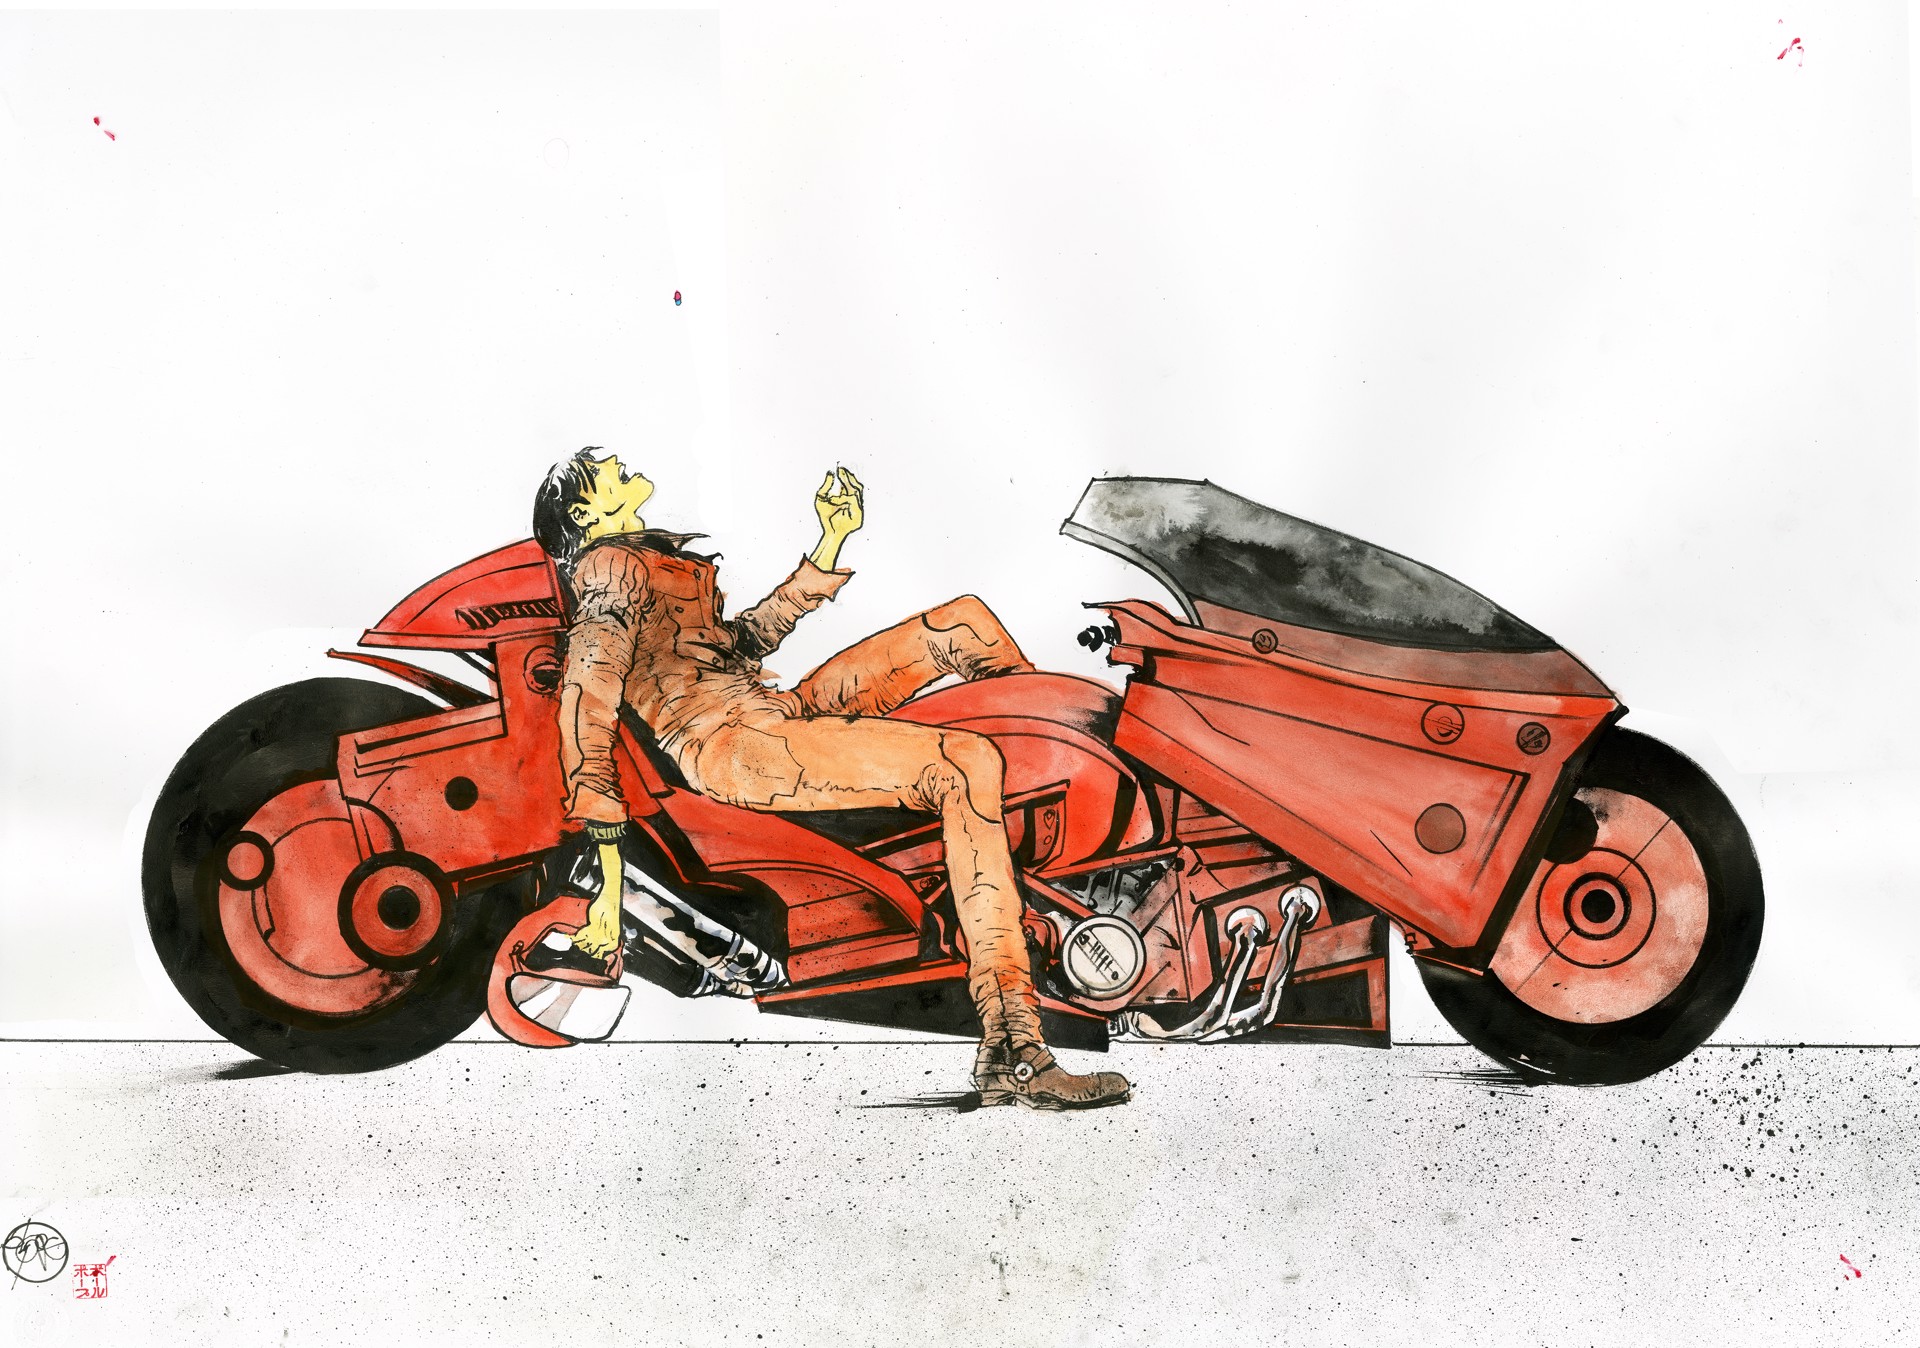 A Tribute to Otomo from Paul Pope by Paul Pope